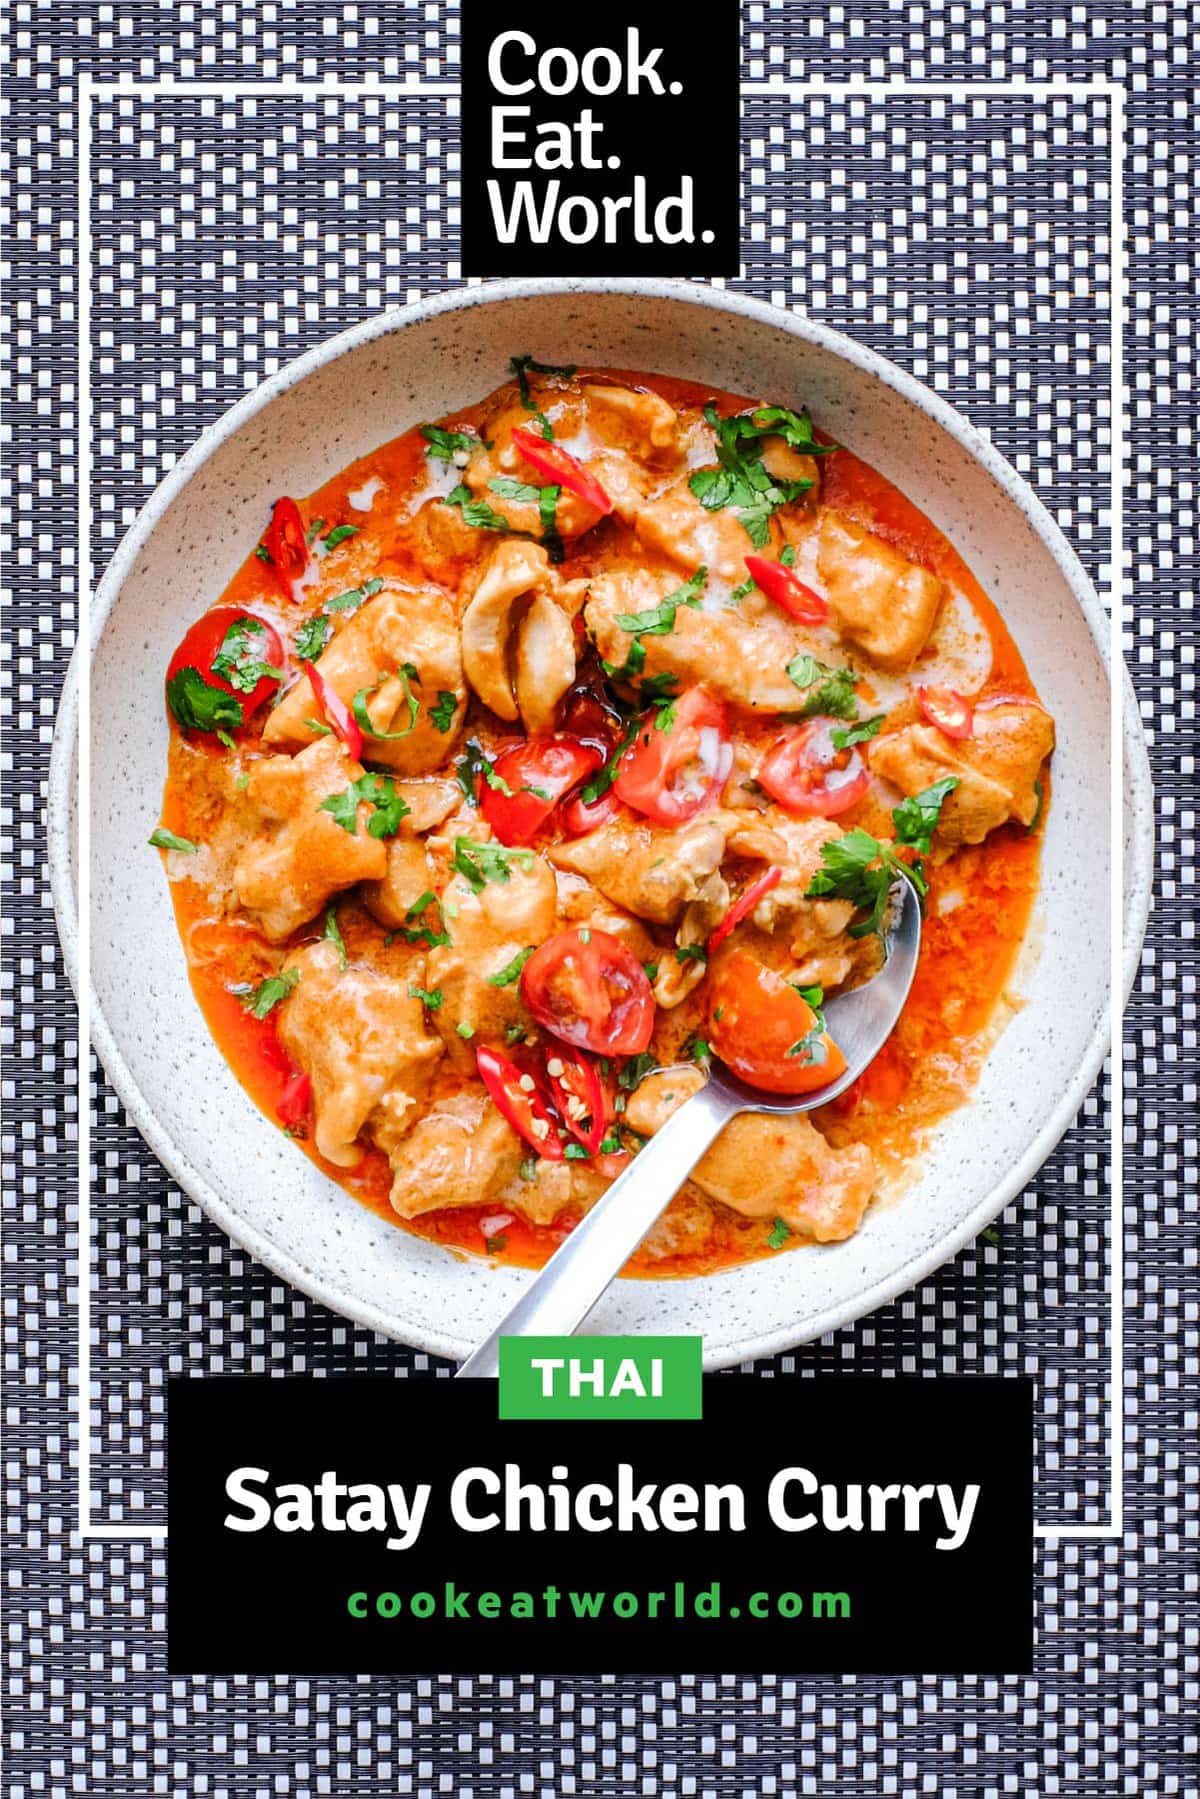 A vibrant peanut satay chicken curry with red chillies and cilantro